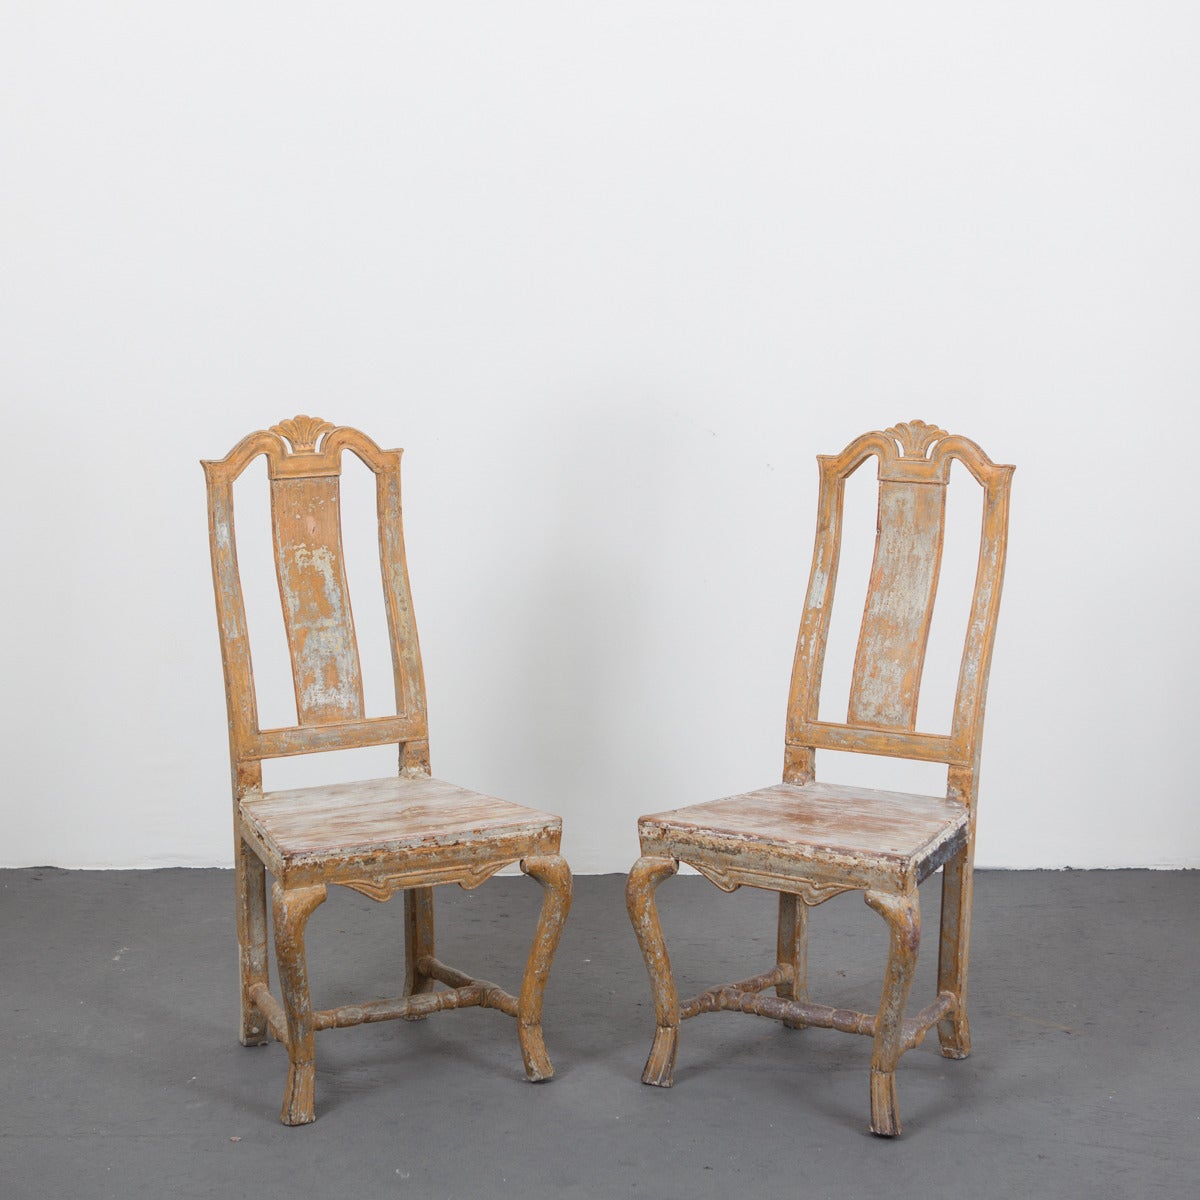 Pair of Swedish side chairs made during the Baroque period 1650-1750. Original paint and carvings.